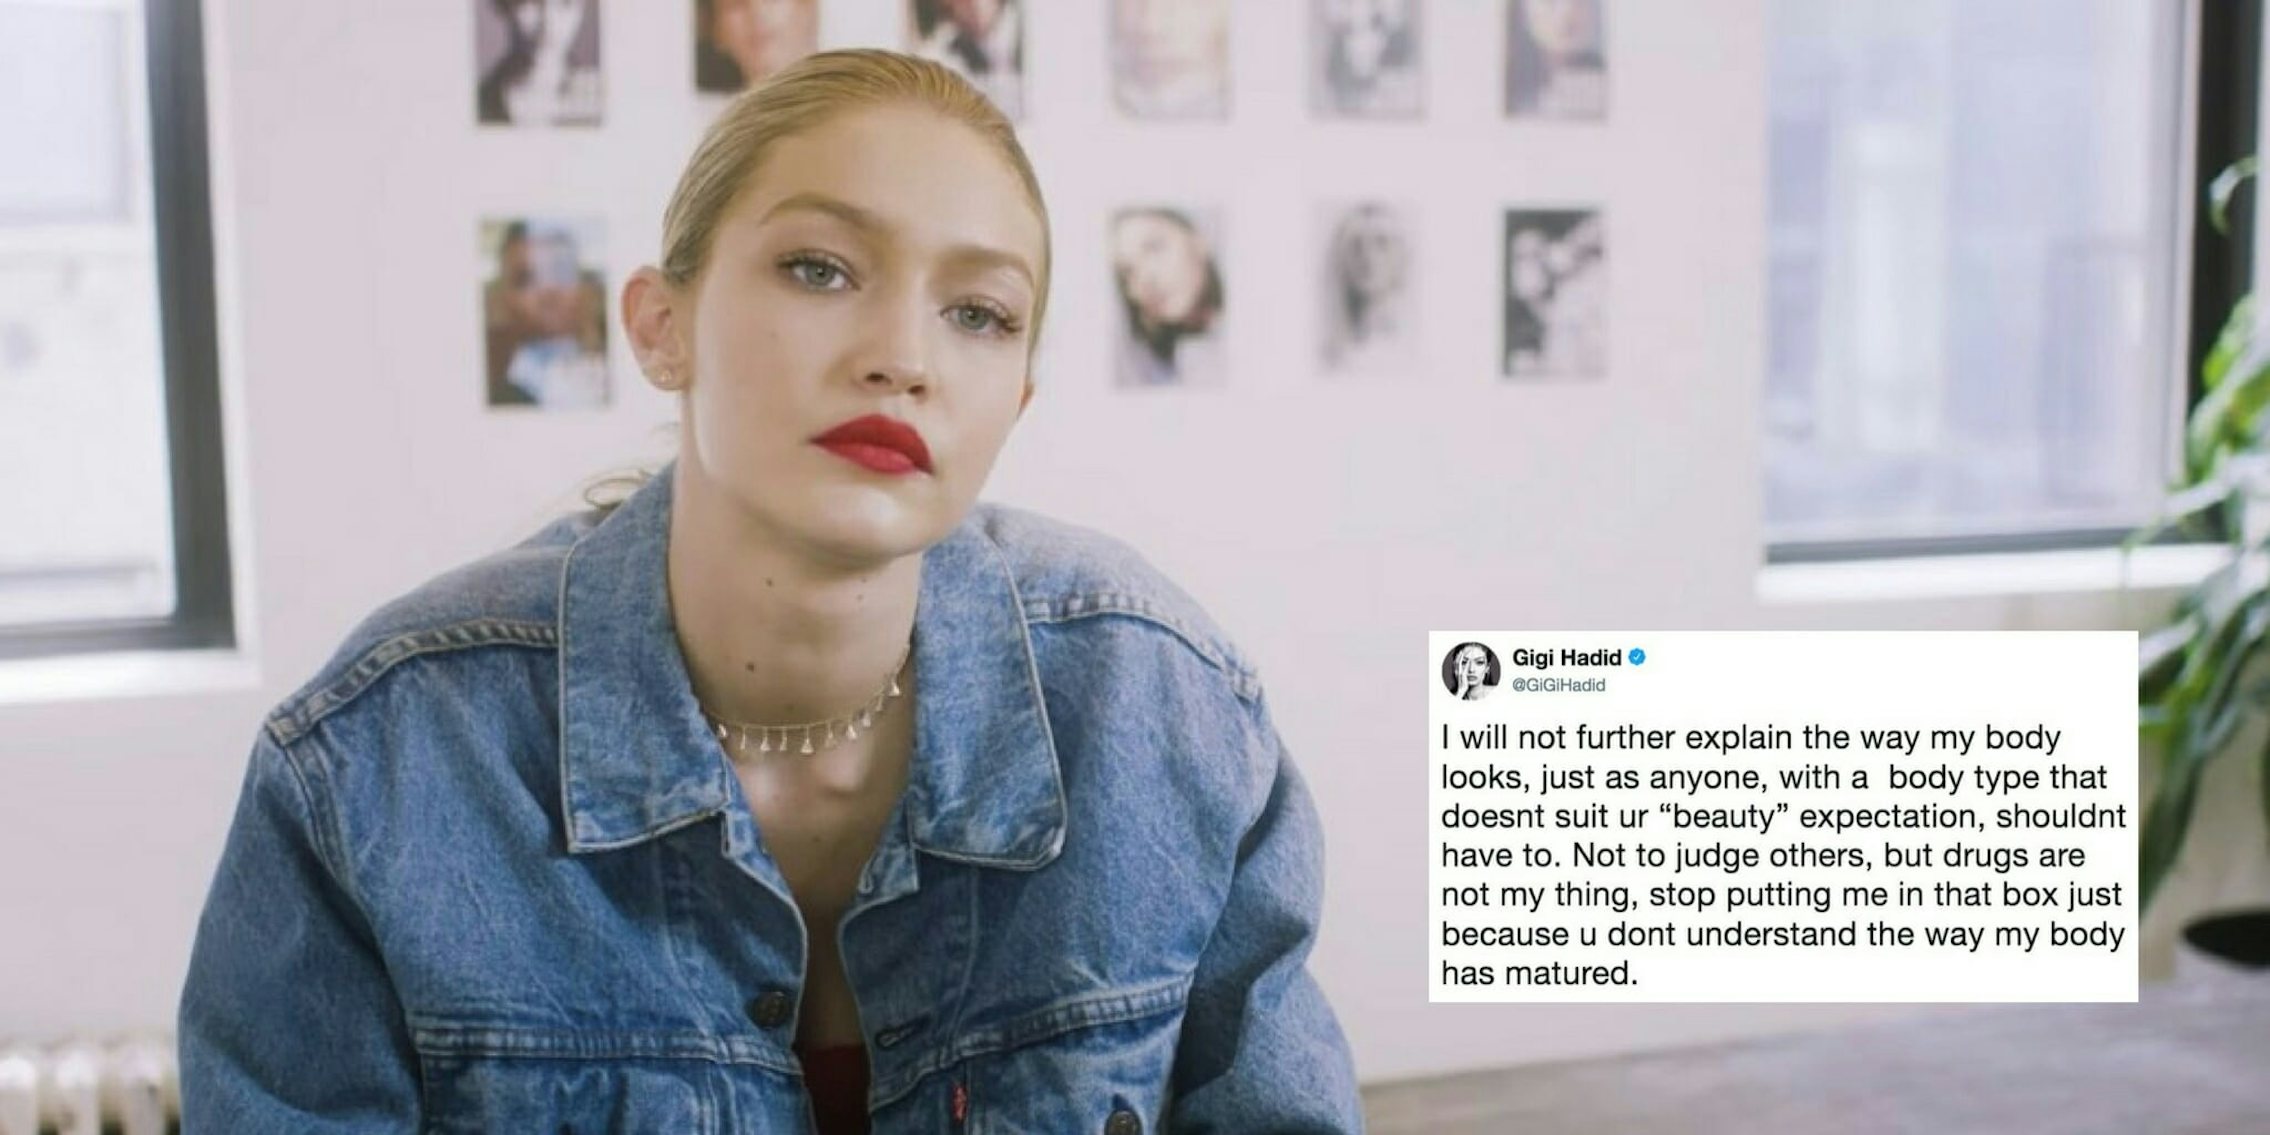 Gigi Hadid opens up about her Hashimoto's disease in a personal Twitter thread.